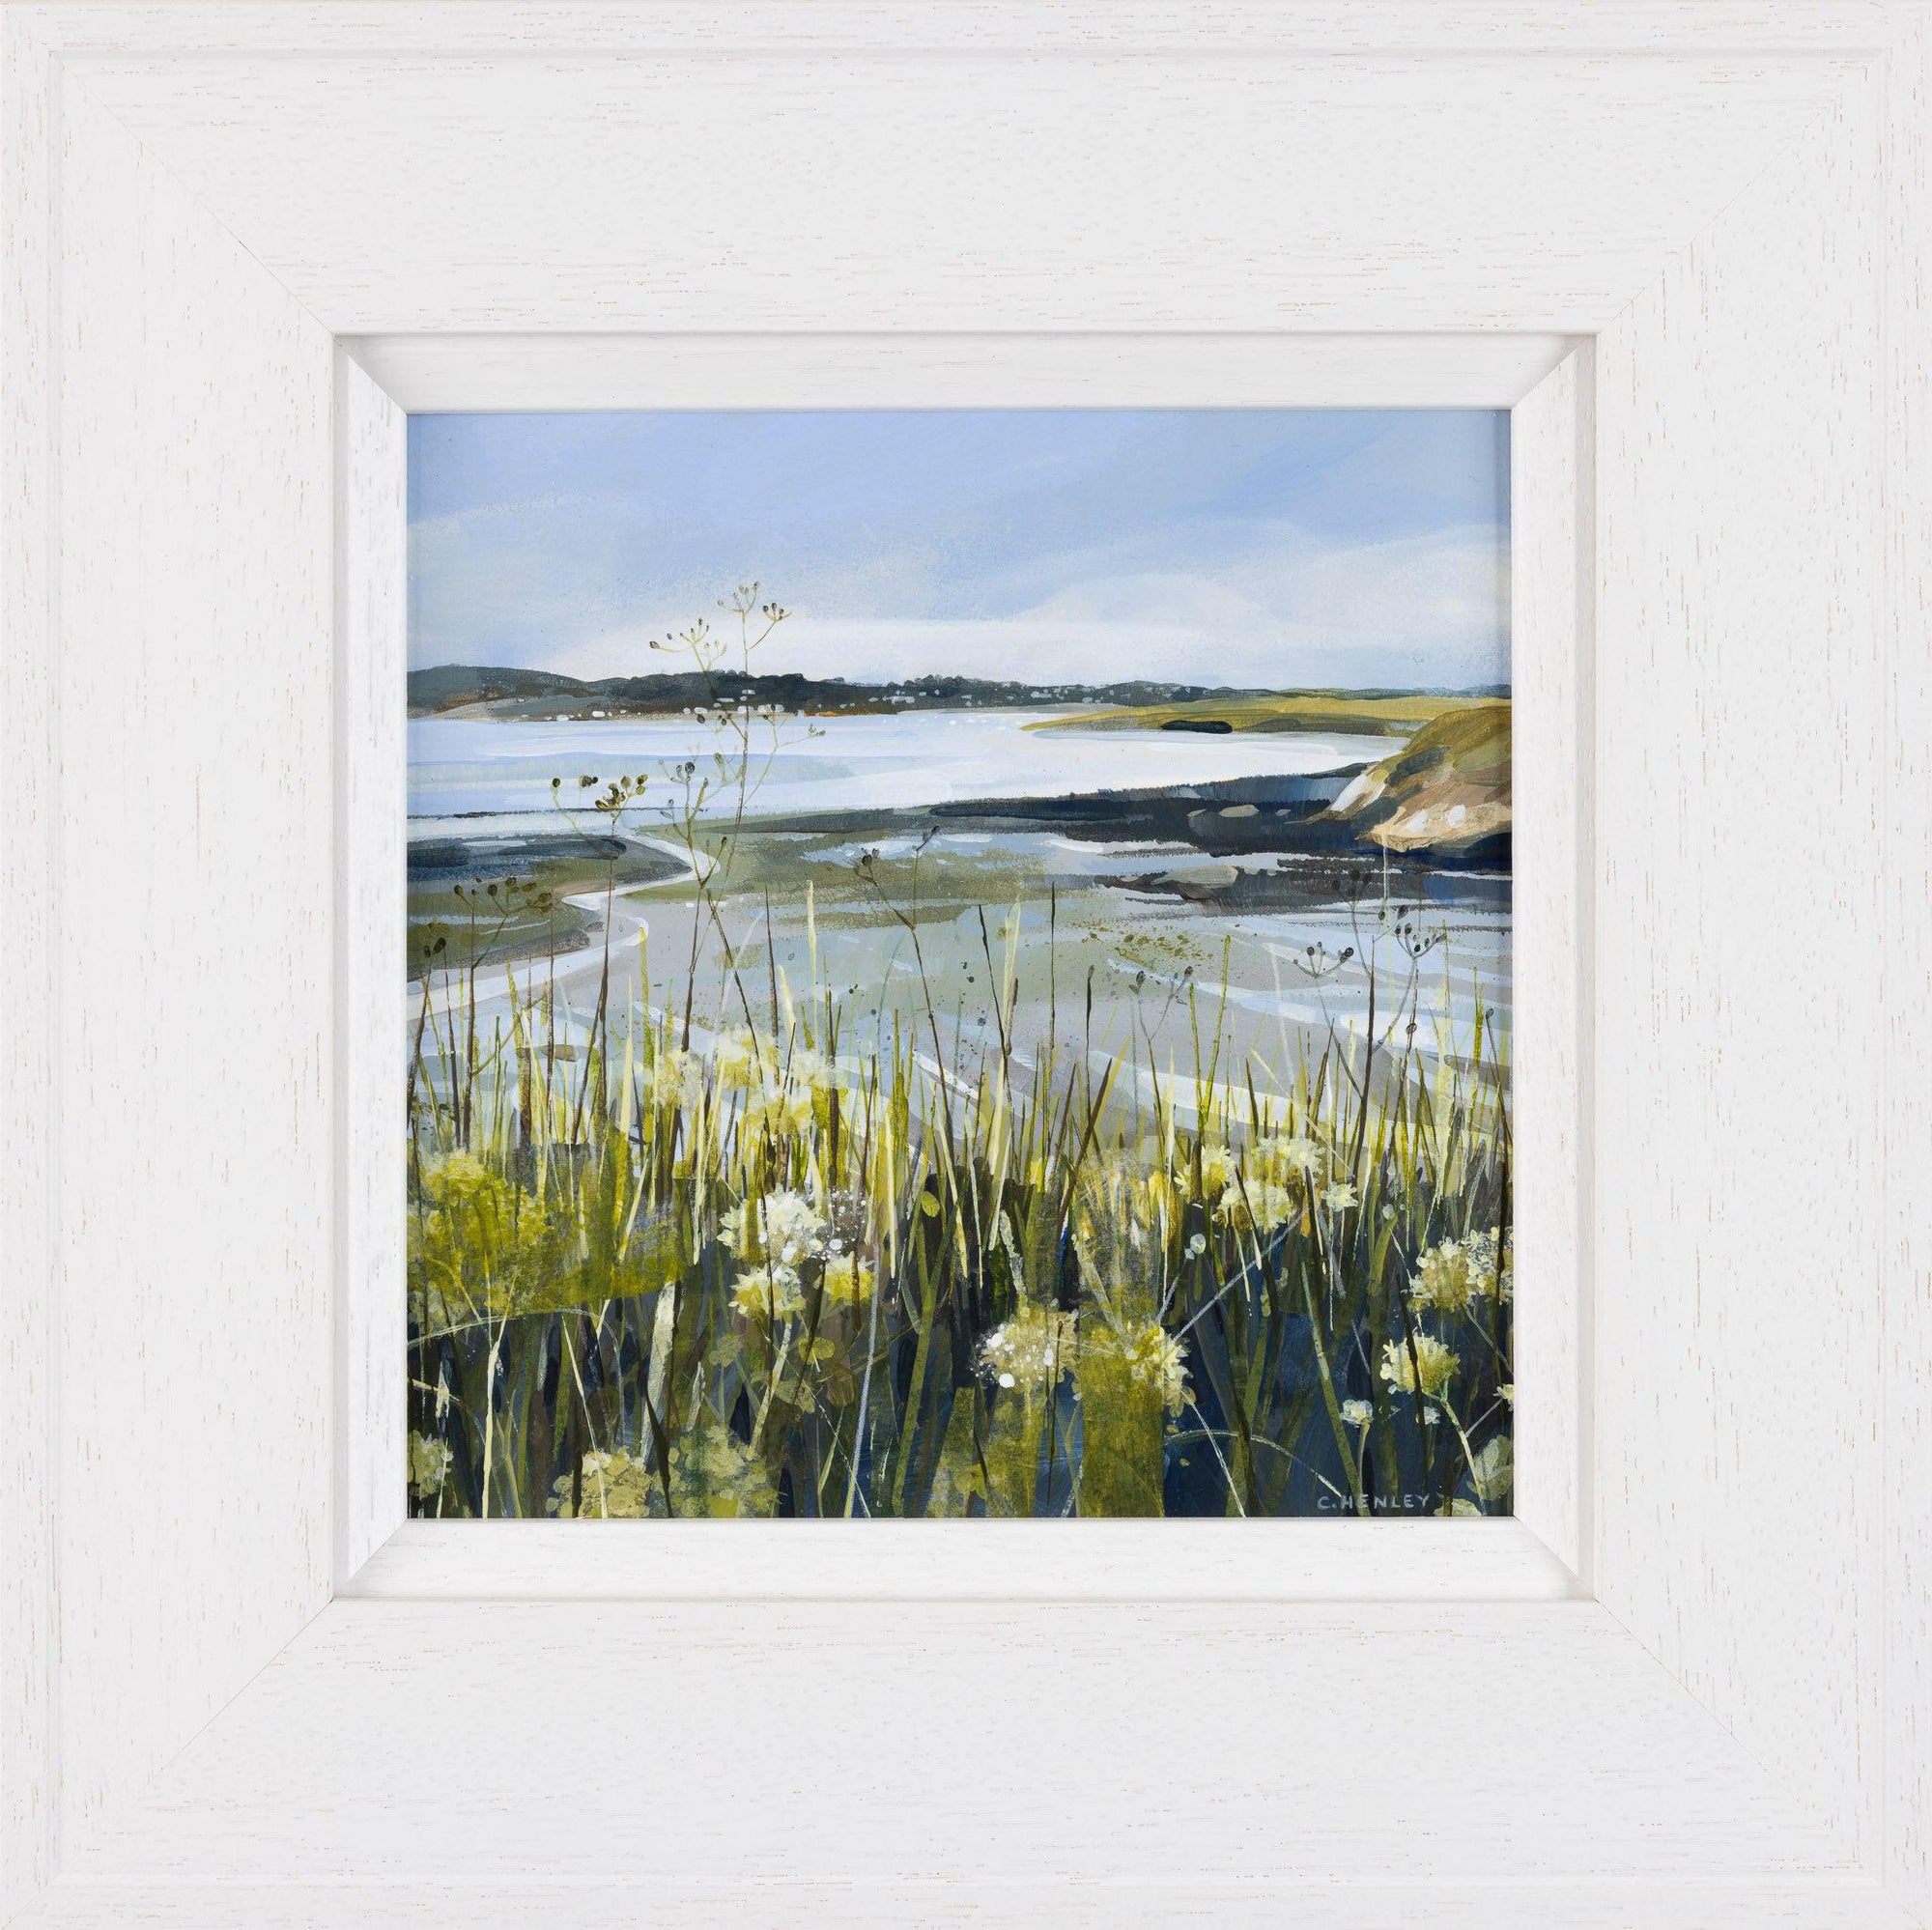 'Looking Upstream, Camel Estuary' a mixed media original by Claire Henley, available at Padstow Gallery, Cornwall